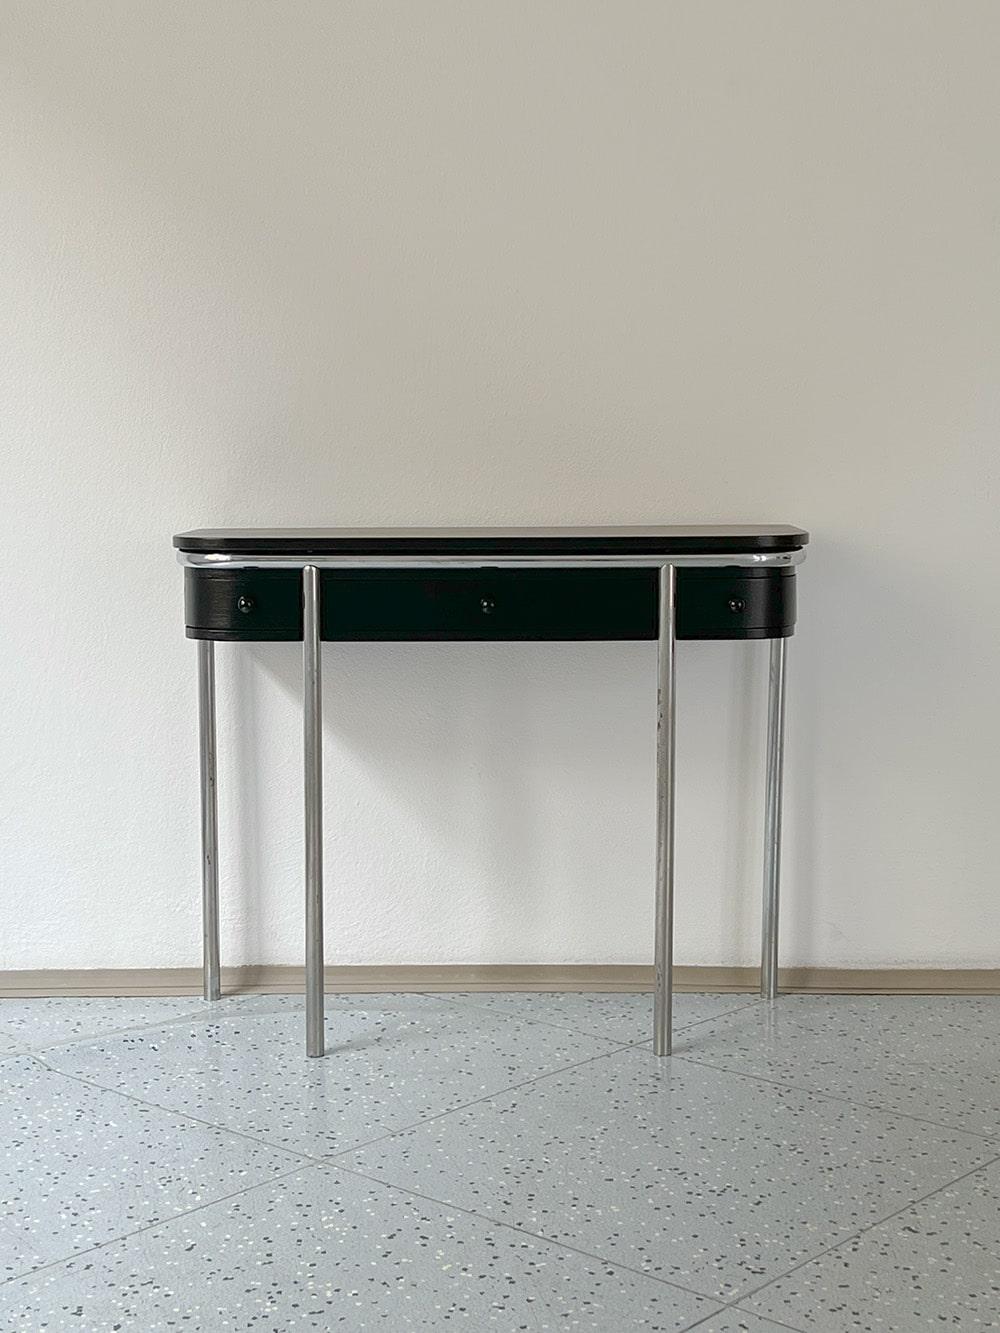 Plated Pauli Blomstedt Modernist Console Table in Chrome and Wood, 1930s